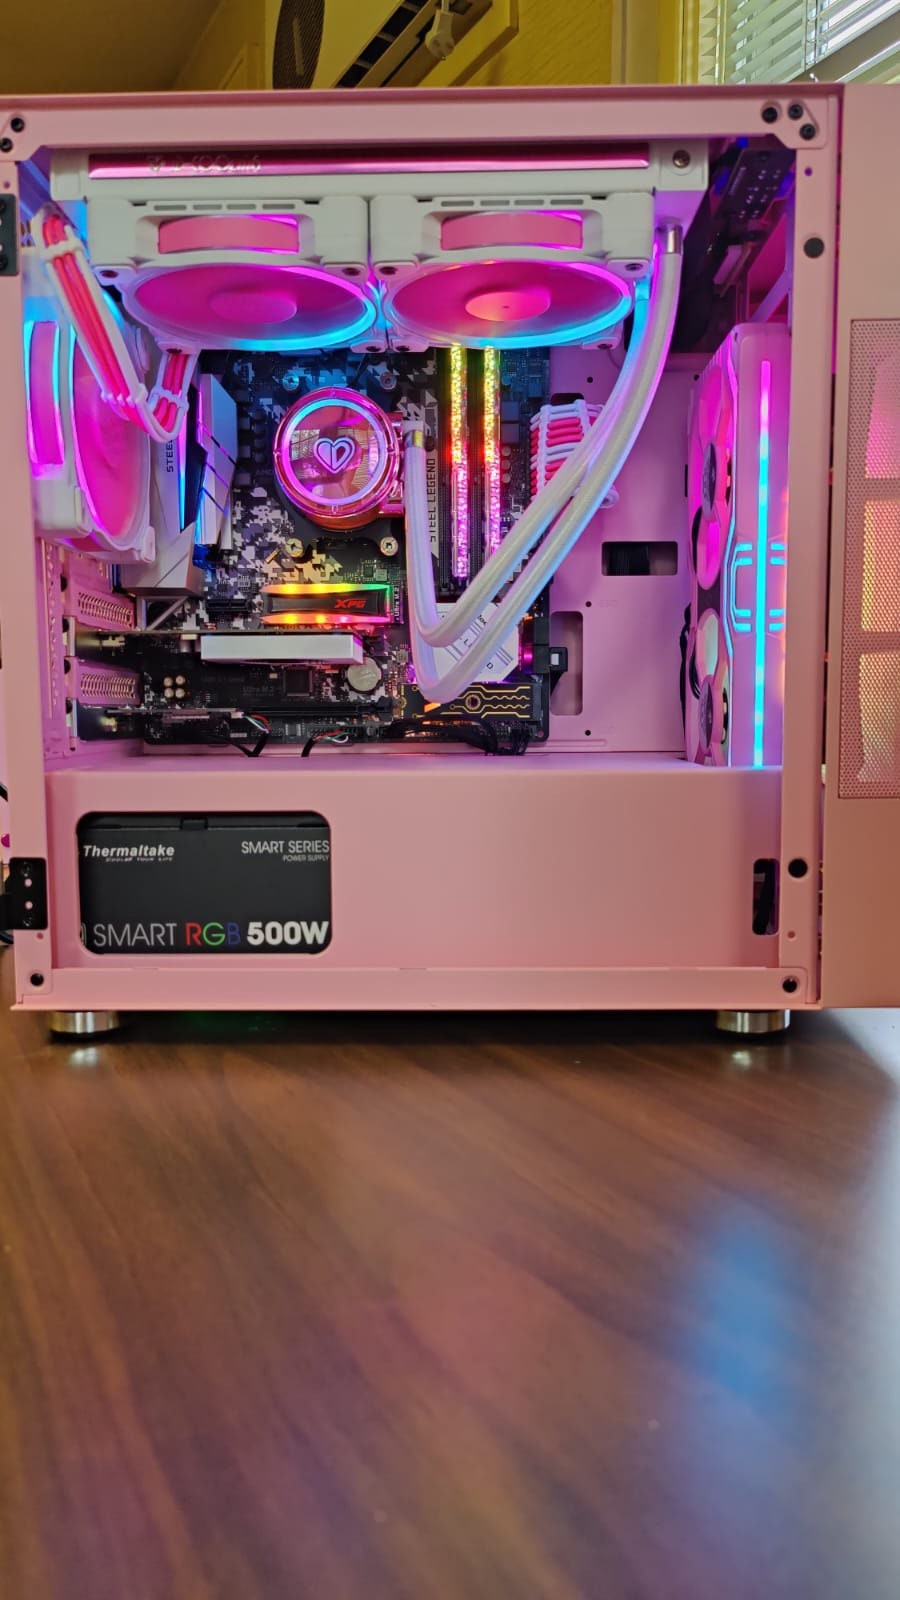 The Under-Evelynne ® - The Original Pink Gaming Computer - Pink GAMING PC